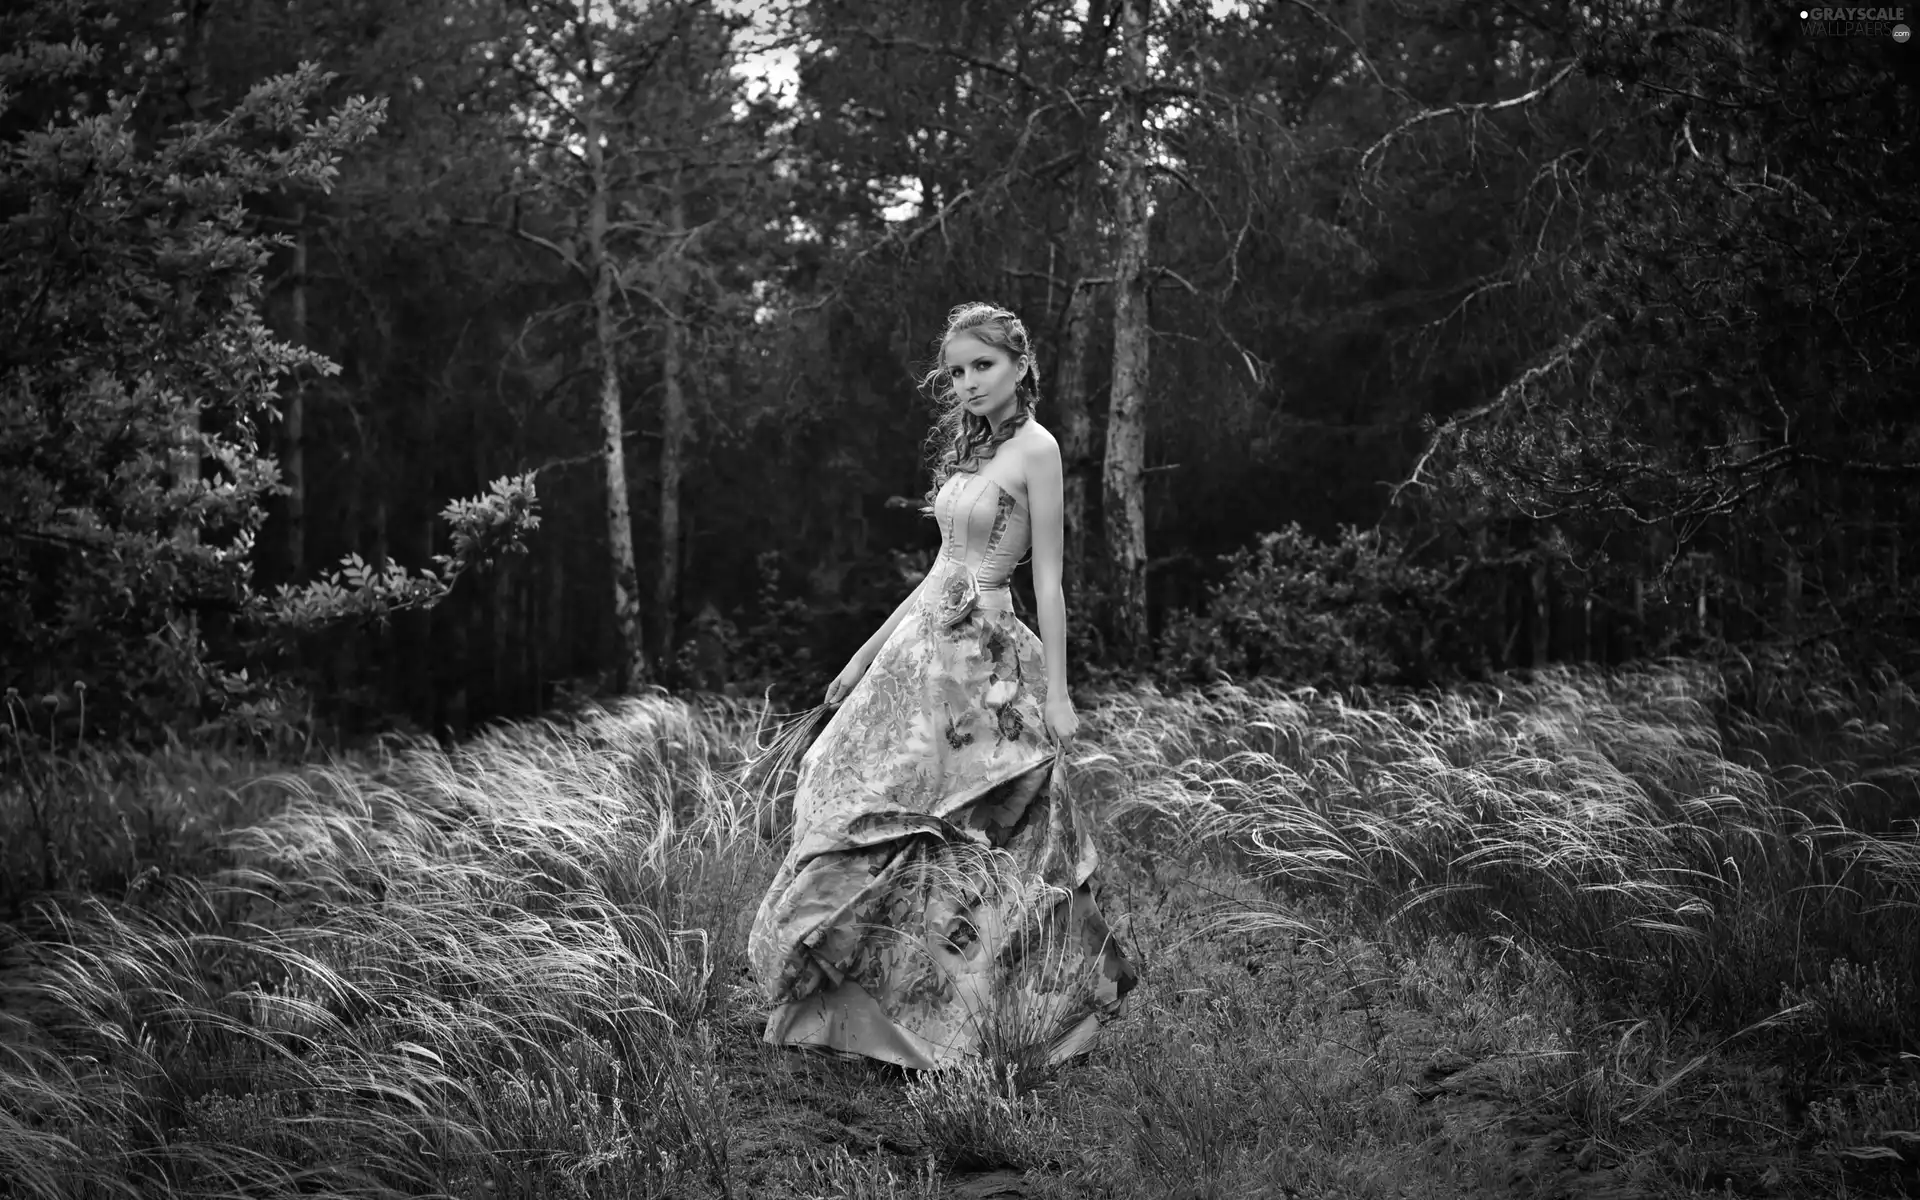 grass, car in the meadow, long, dry, forest, Women, dress